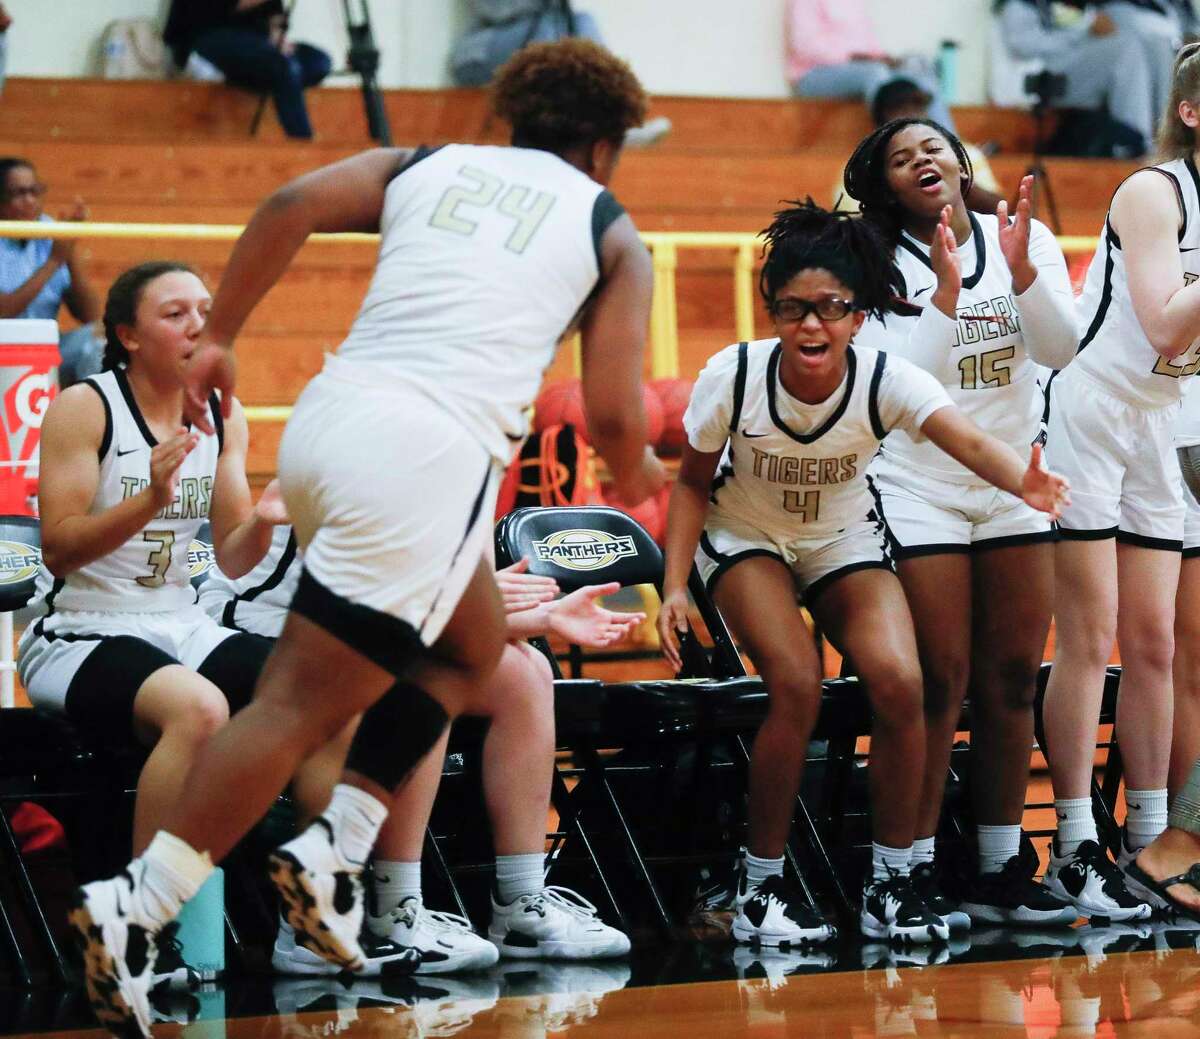 Conroe’s Alana Harris (4) gives Ra’Niyah Lewis (24) a high-five after making a shot during the third quarter of a area high school basketball playoff game, Thursday, Feb. 17, 2022, in Spring.